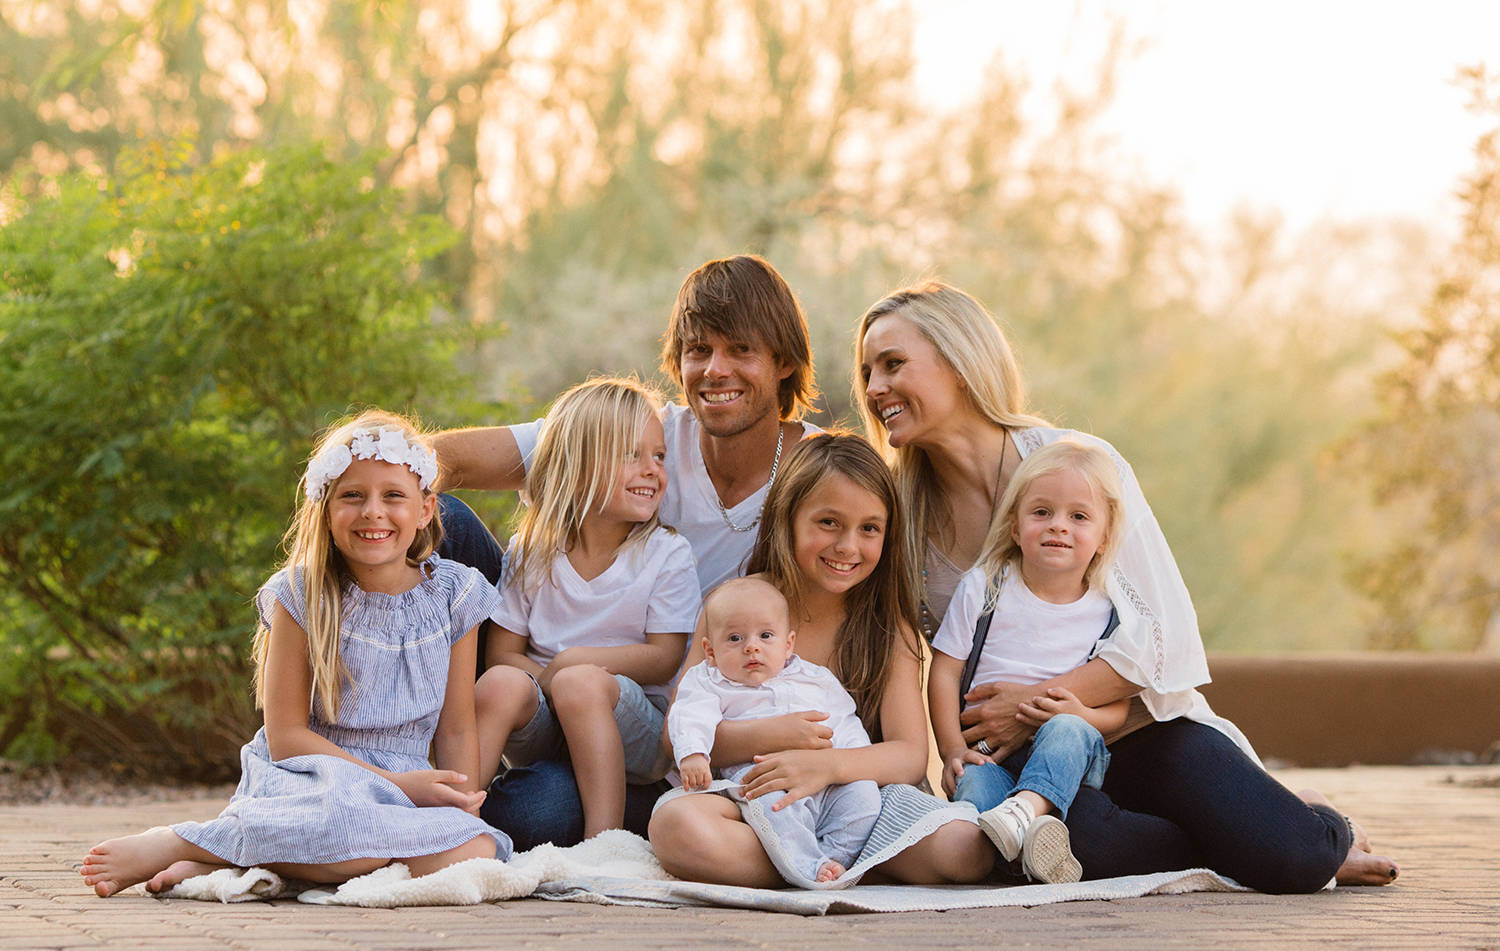 Aaron Baddeley With His Family Wallpaper